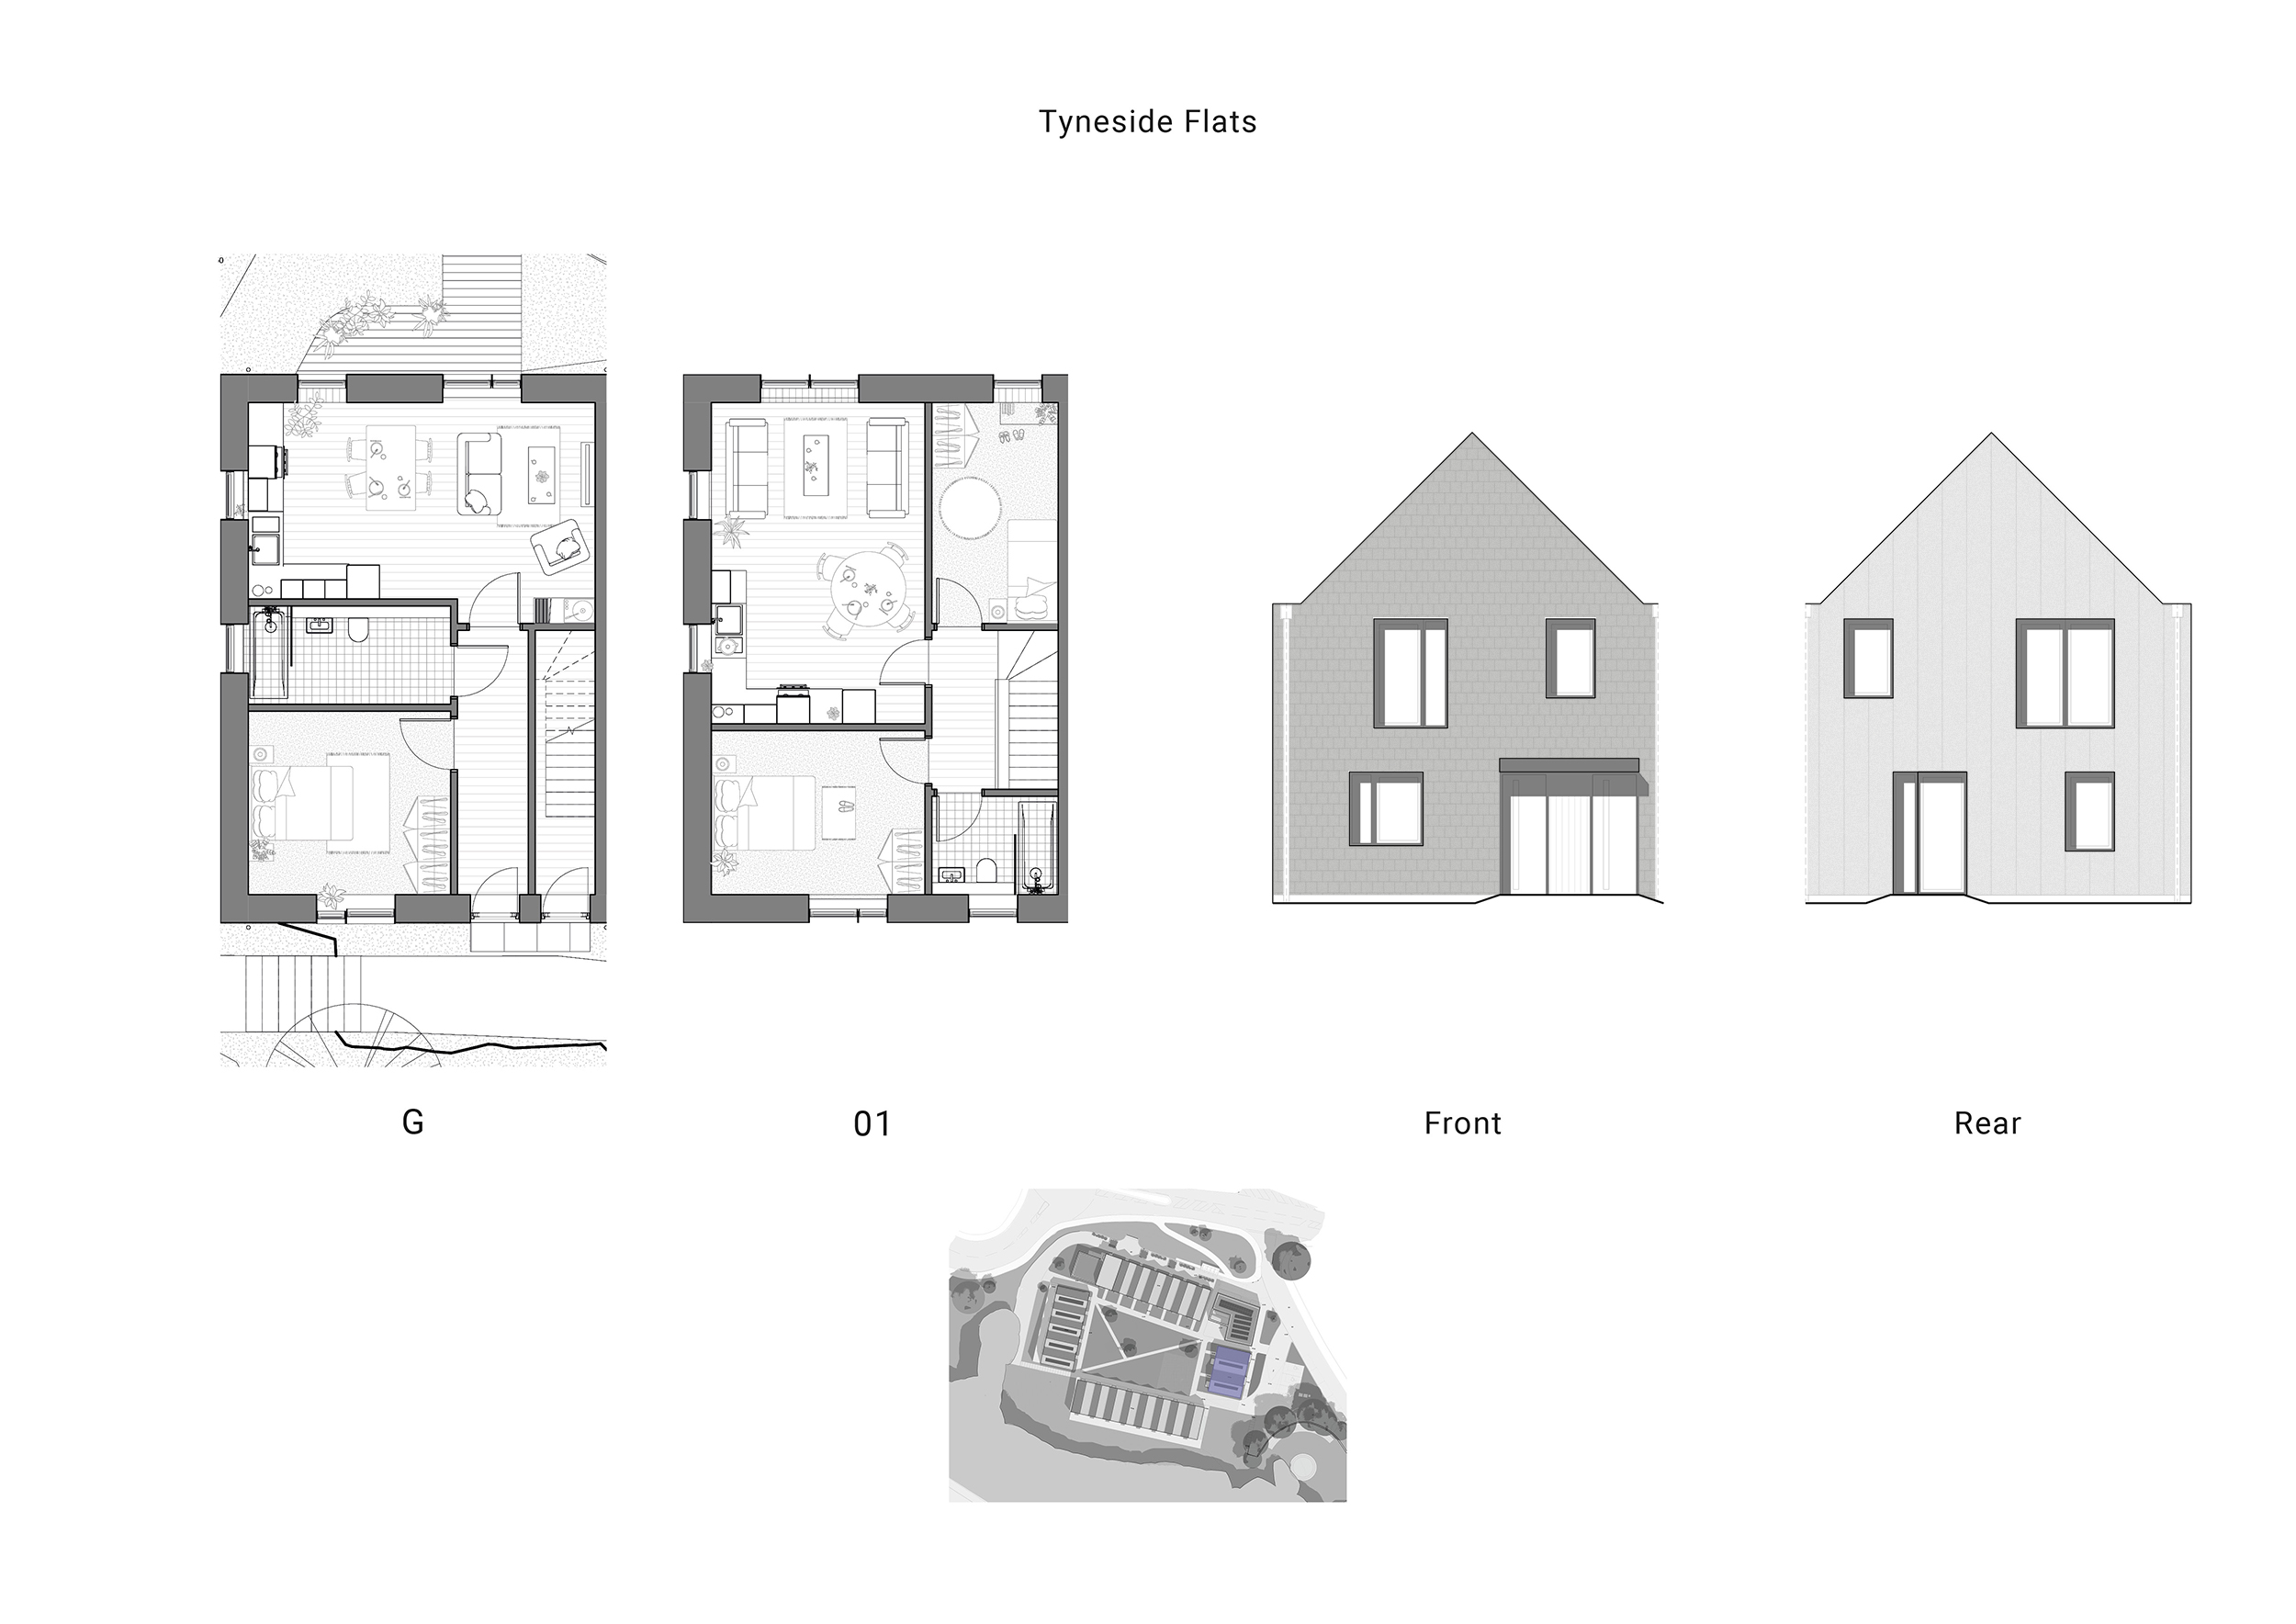 Tyneside Flats Plans and Elevations